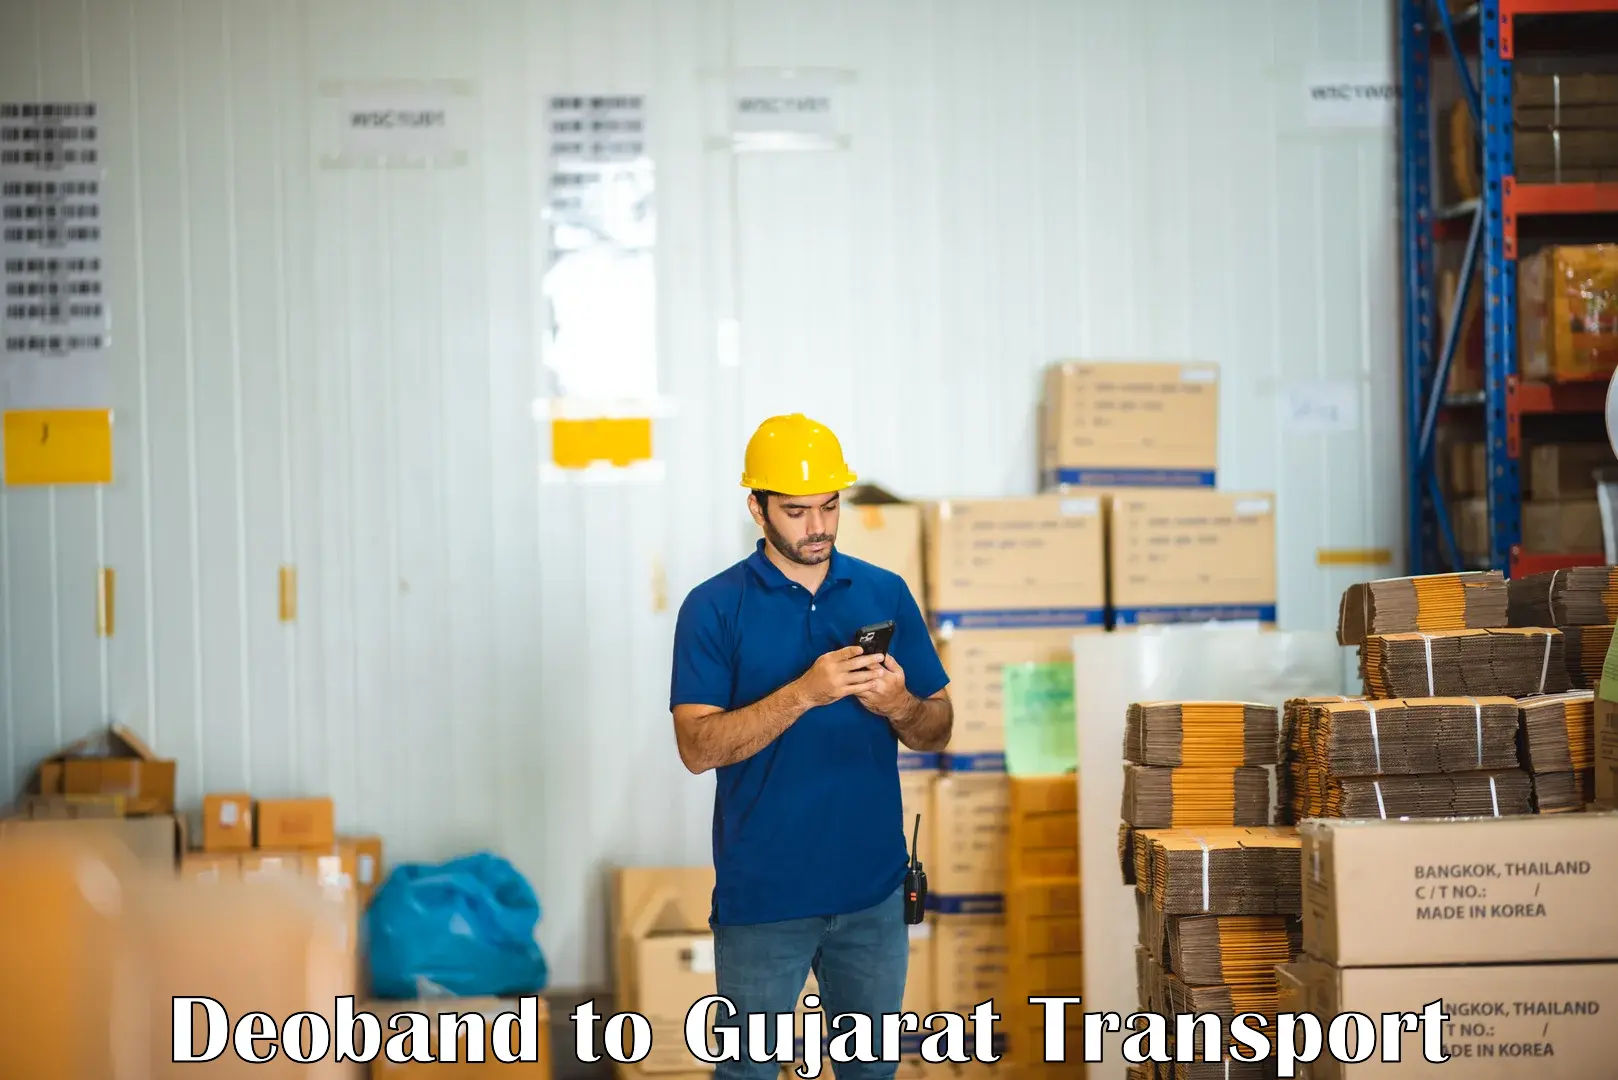 Furniture transport service Deoband to Ahmedabad